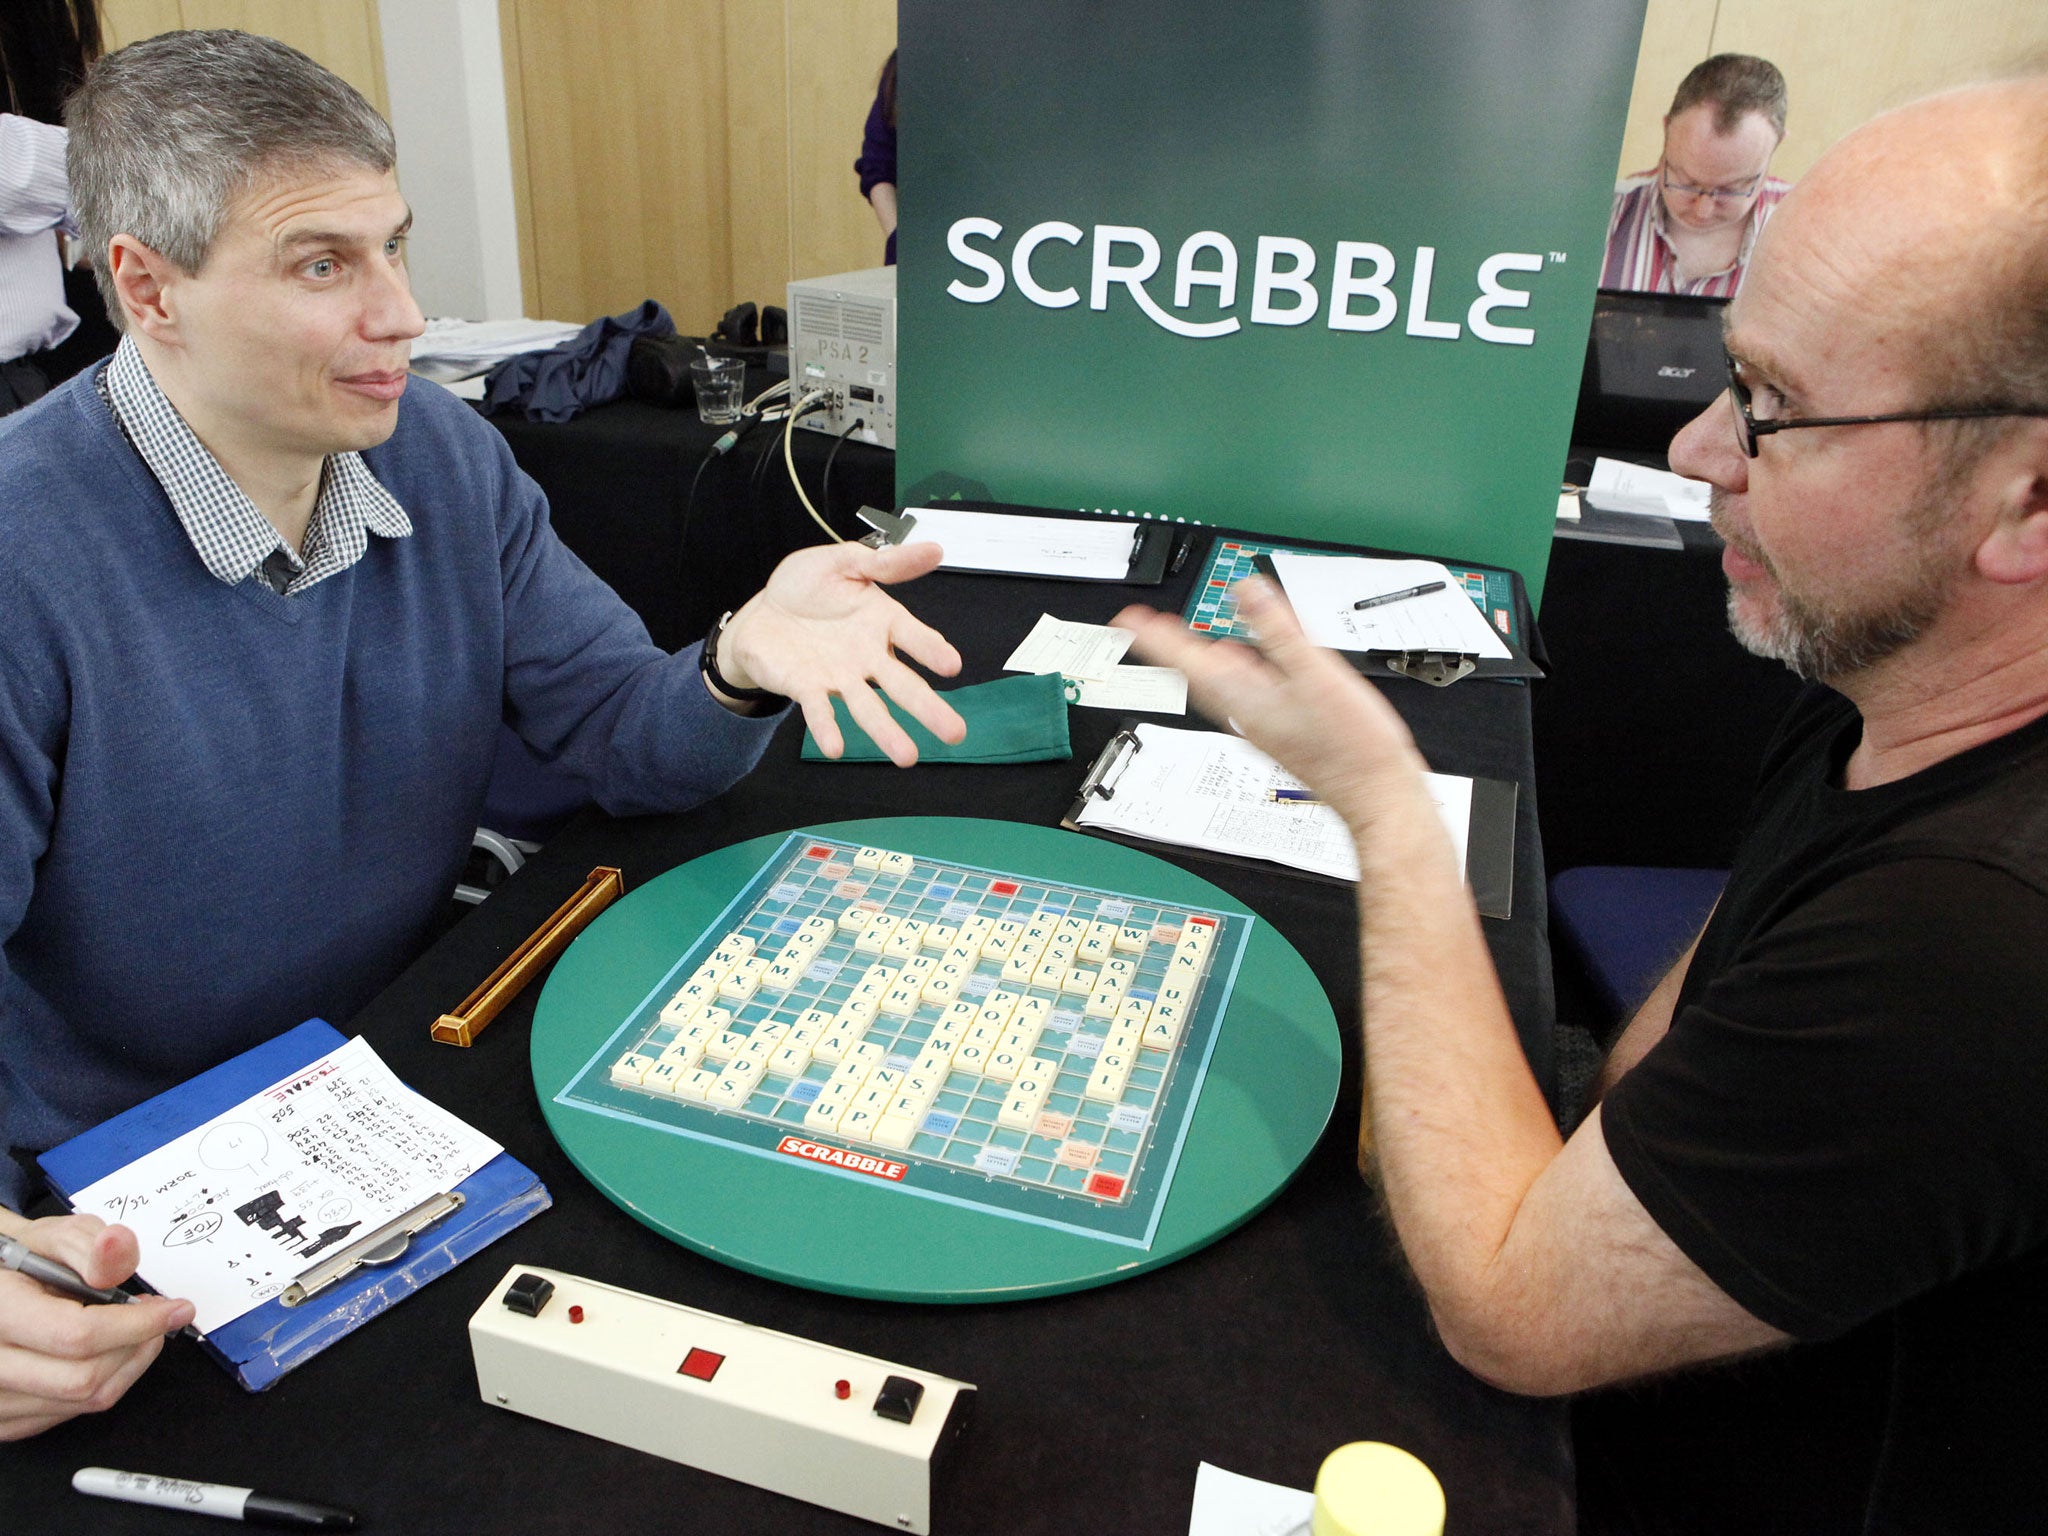 Paul Allan, left, discusses his winning board with defeated opponent Allan Simmons, right, at the 42nd British National Scrabble Championships in London